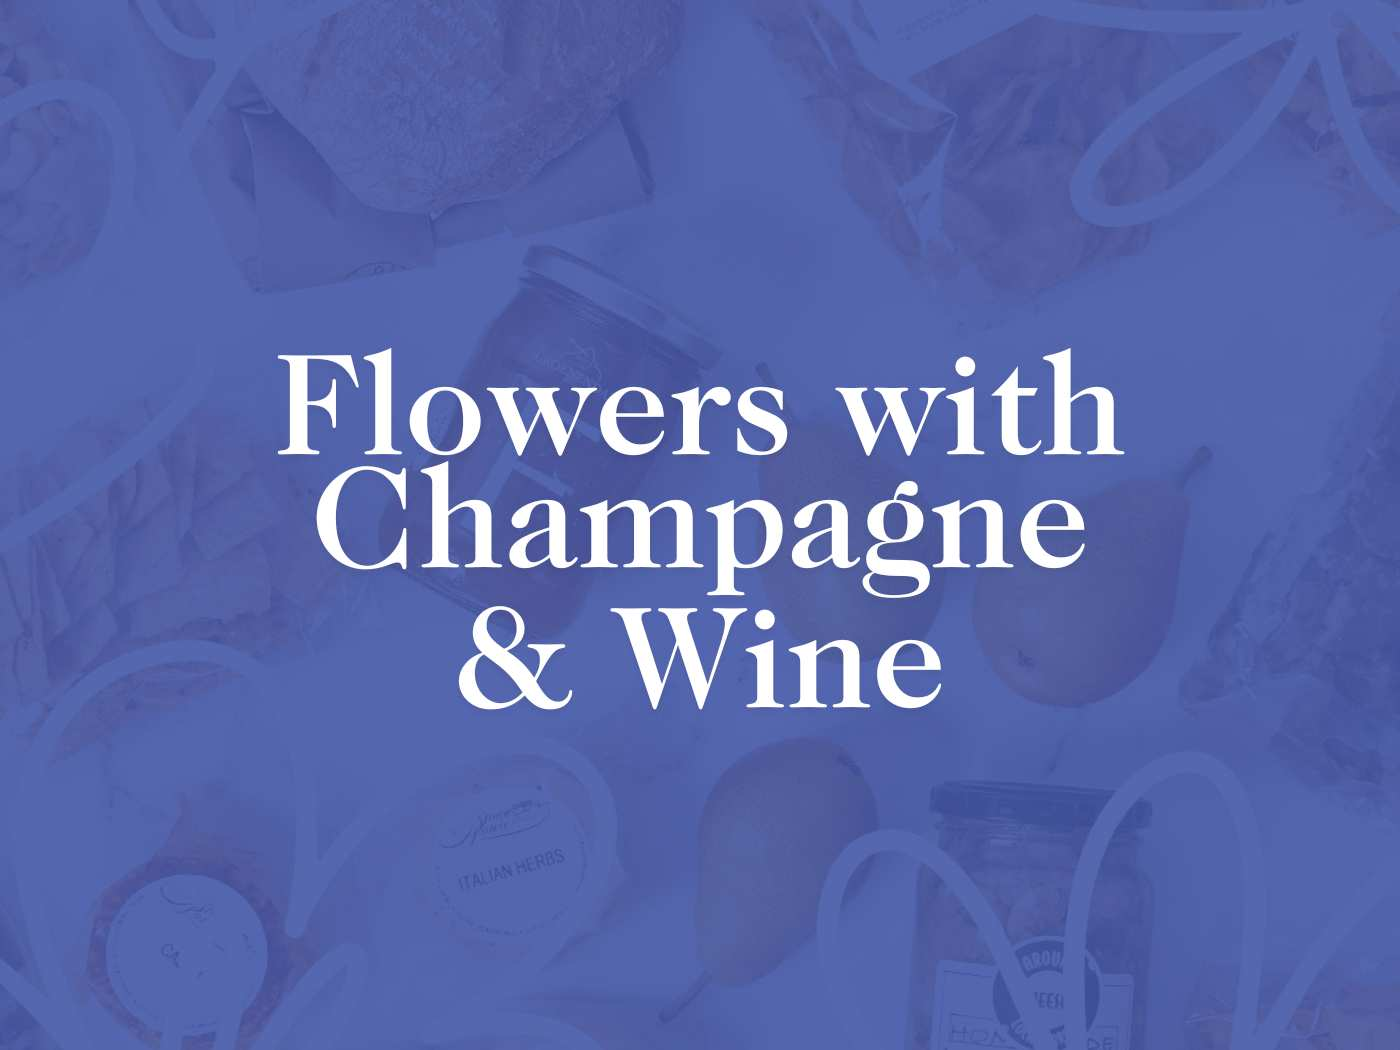 Flowers with Champagne & Wine. Delivered with Heart. Fabulous Flowers and Gifts.